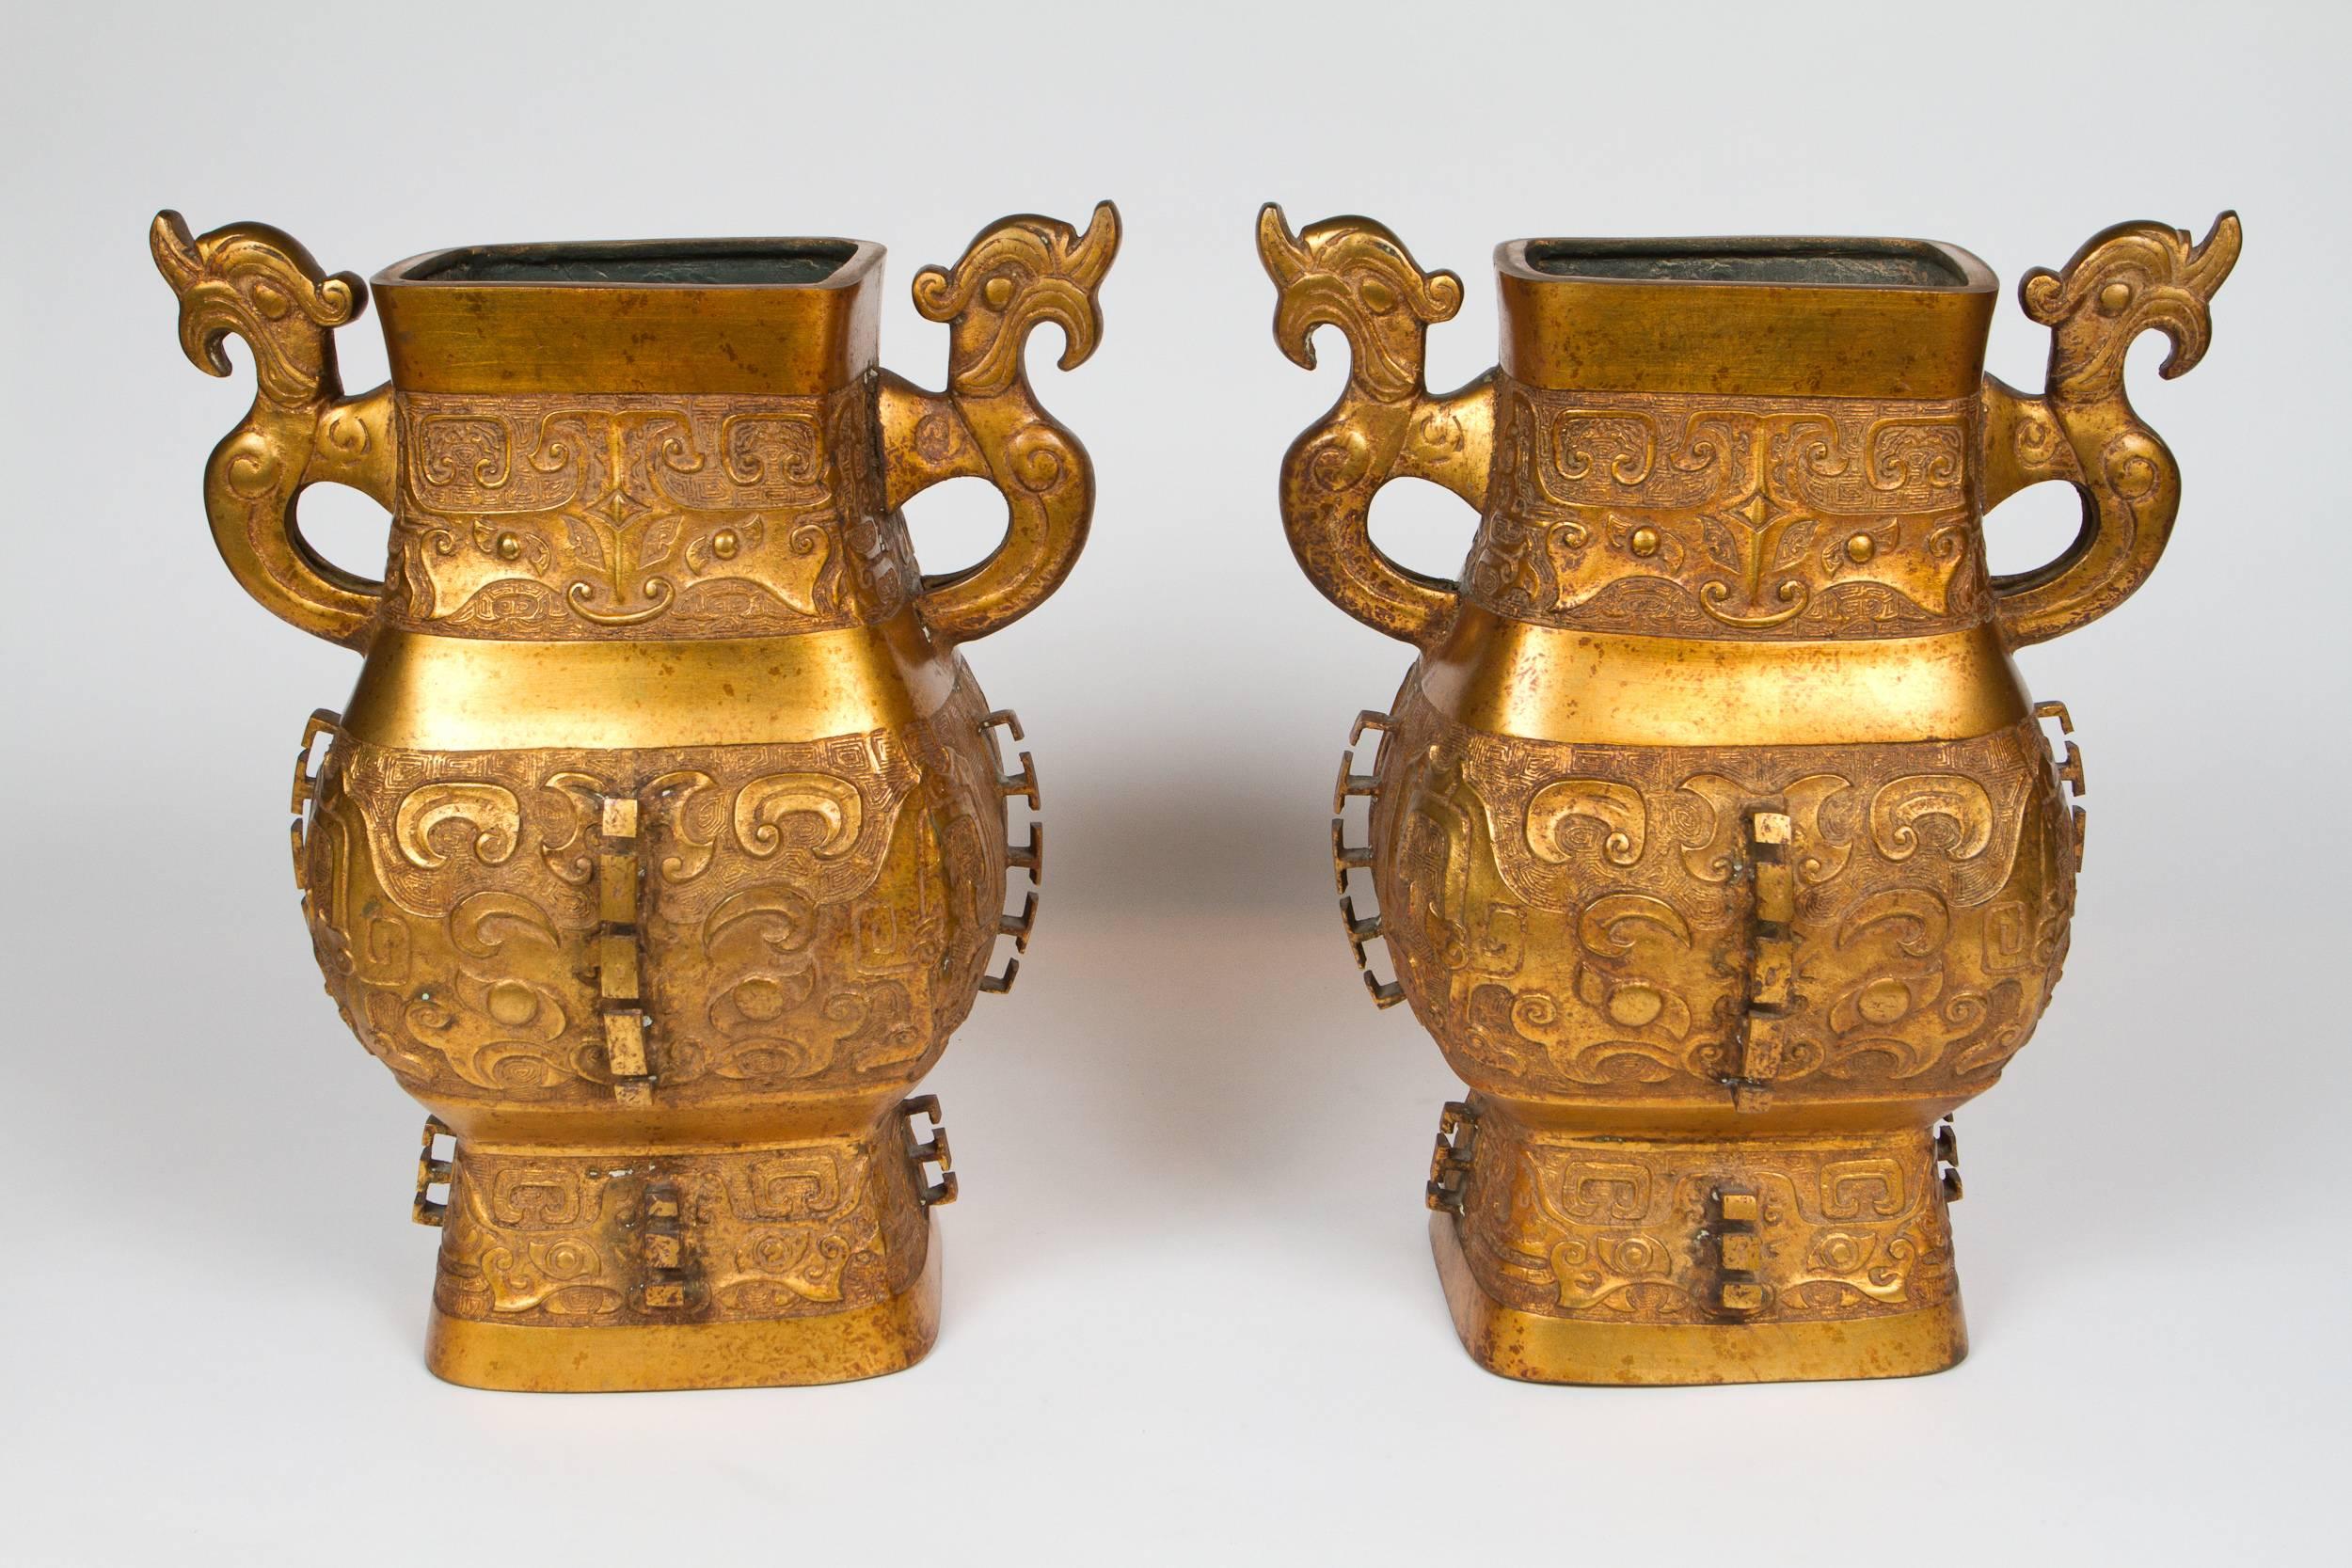 Impressive pair of archaistic gilt bronze Chinese vases. Perfect scale to use as lamps, already drilled for that purposes.